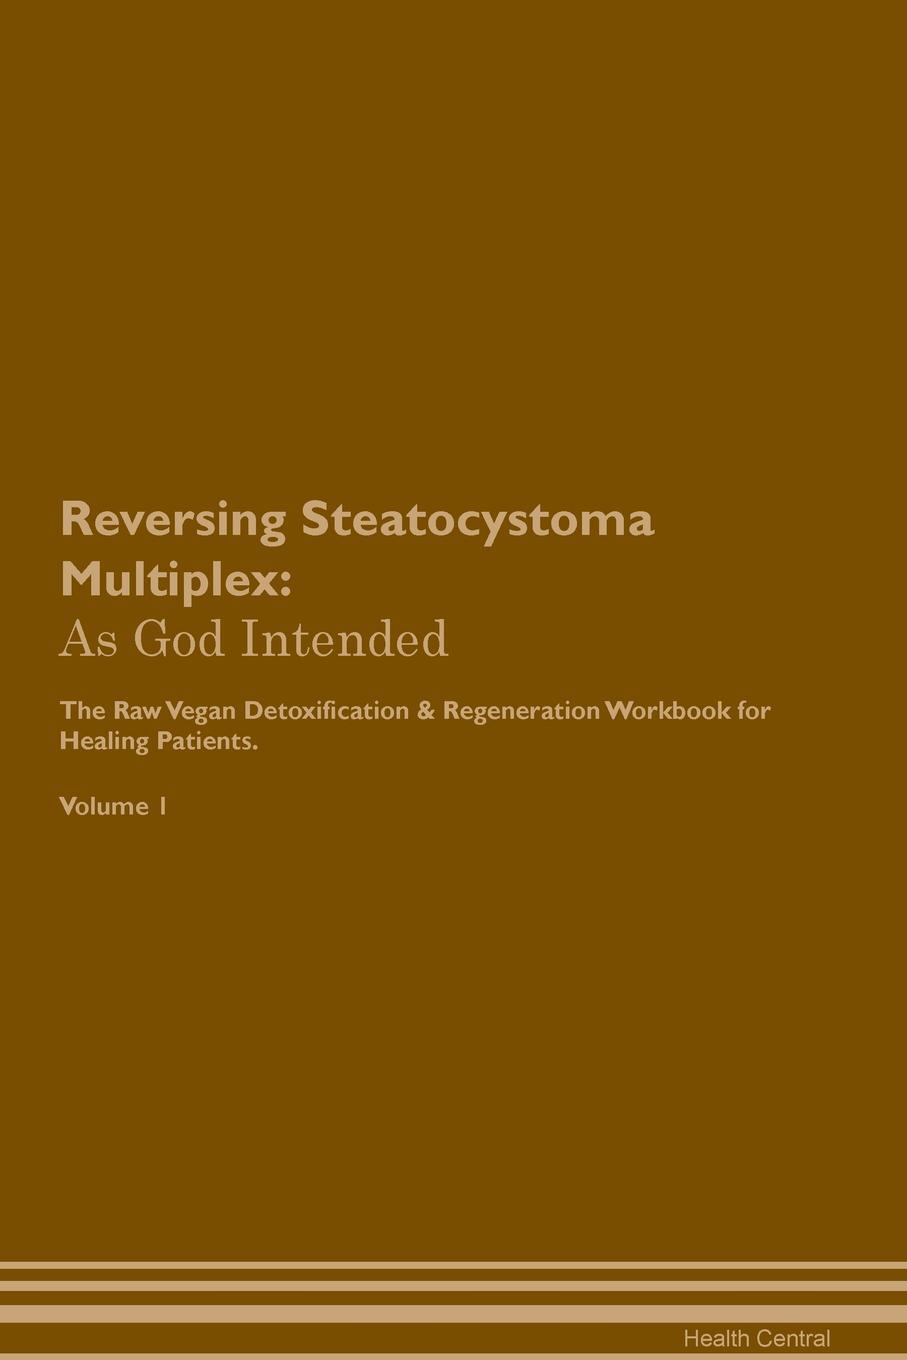 фото Reversing Steatocystoma Multiplex. As God Intended The Raw Vegan Plant-Based Detoxification & Regeneration Workbook for Healing Patients. Volume 1